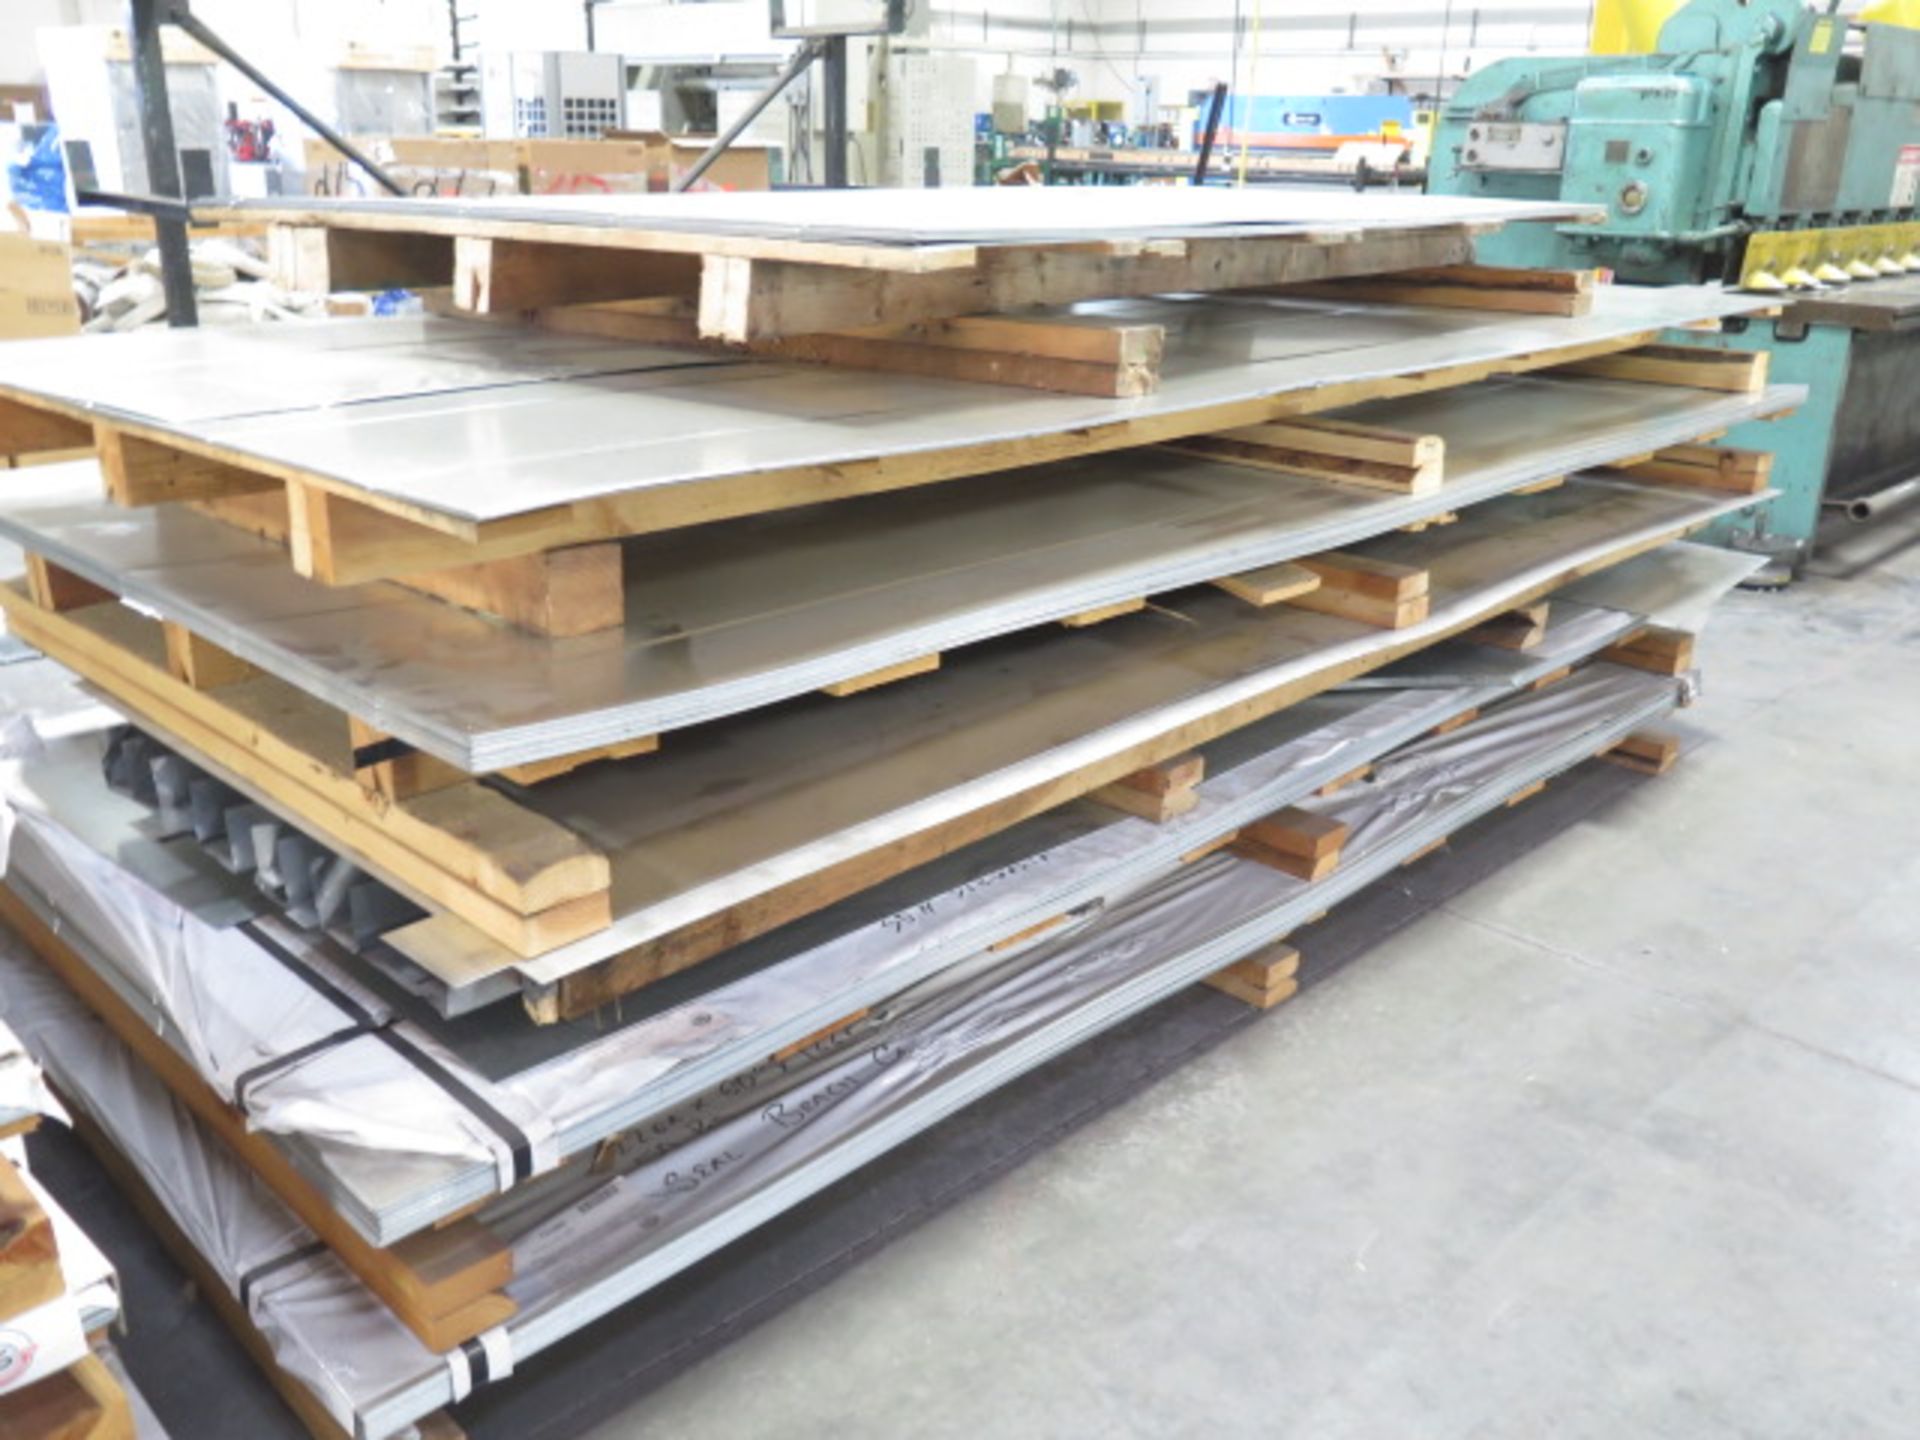 Large Quantity of Beaded Galvanized Sheet Stock anmd Steel Sheet Stock (SOLD AS-IS - NO WARRANTY) - Image 16 of 19